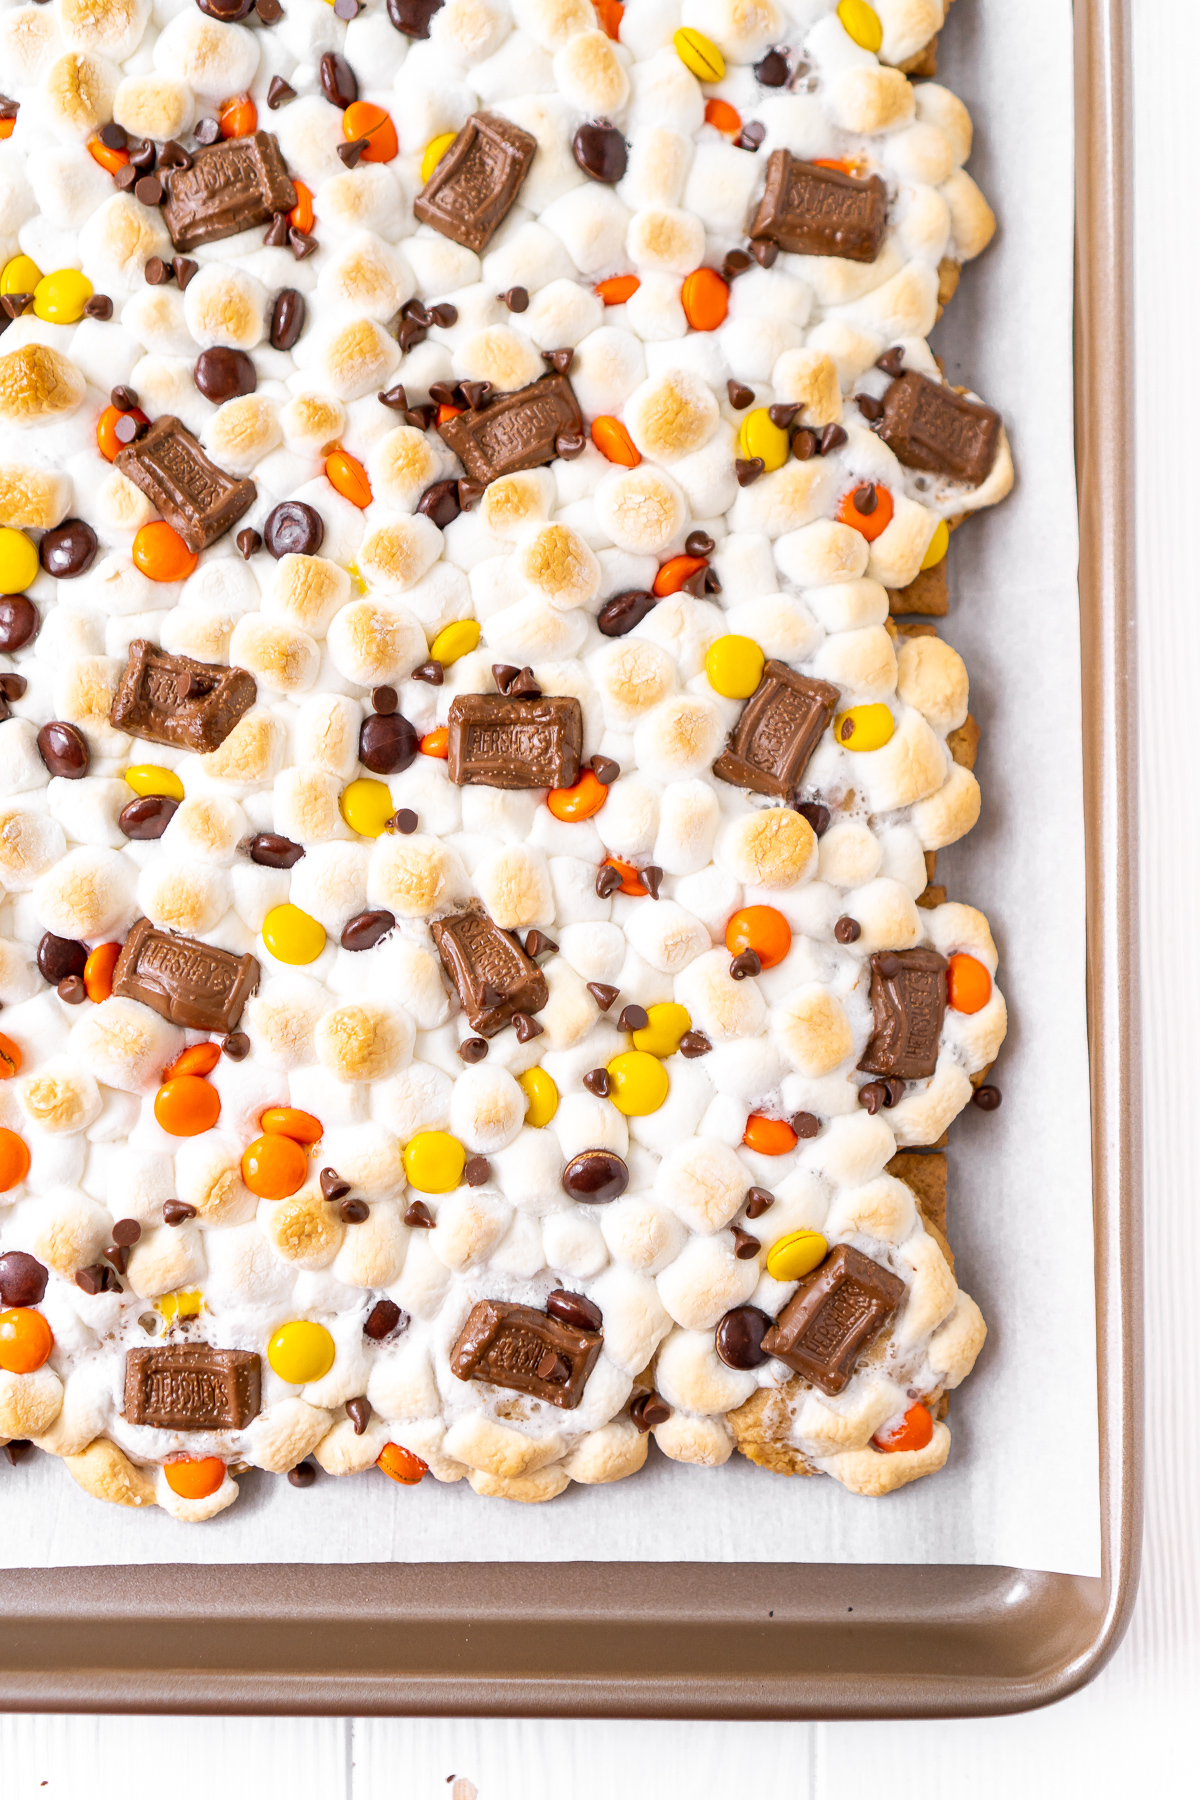 Overhead photo of smores bars on a baking sheet.